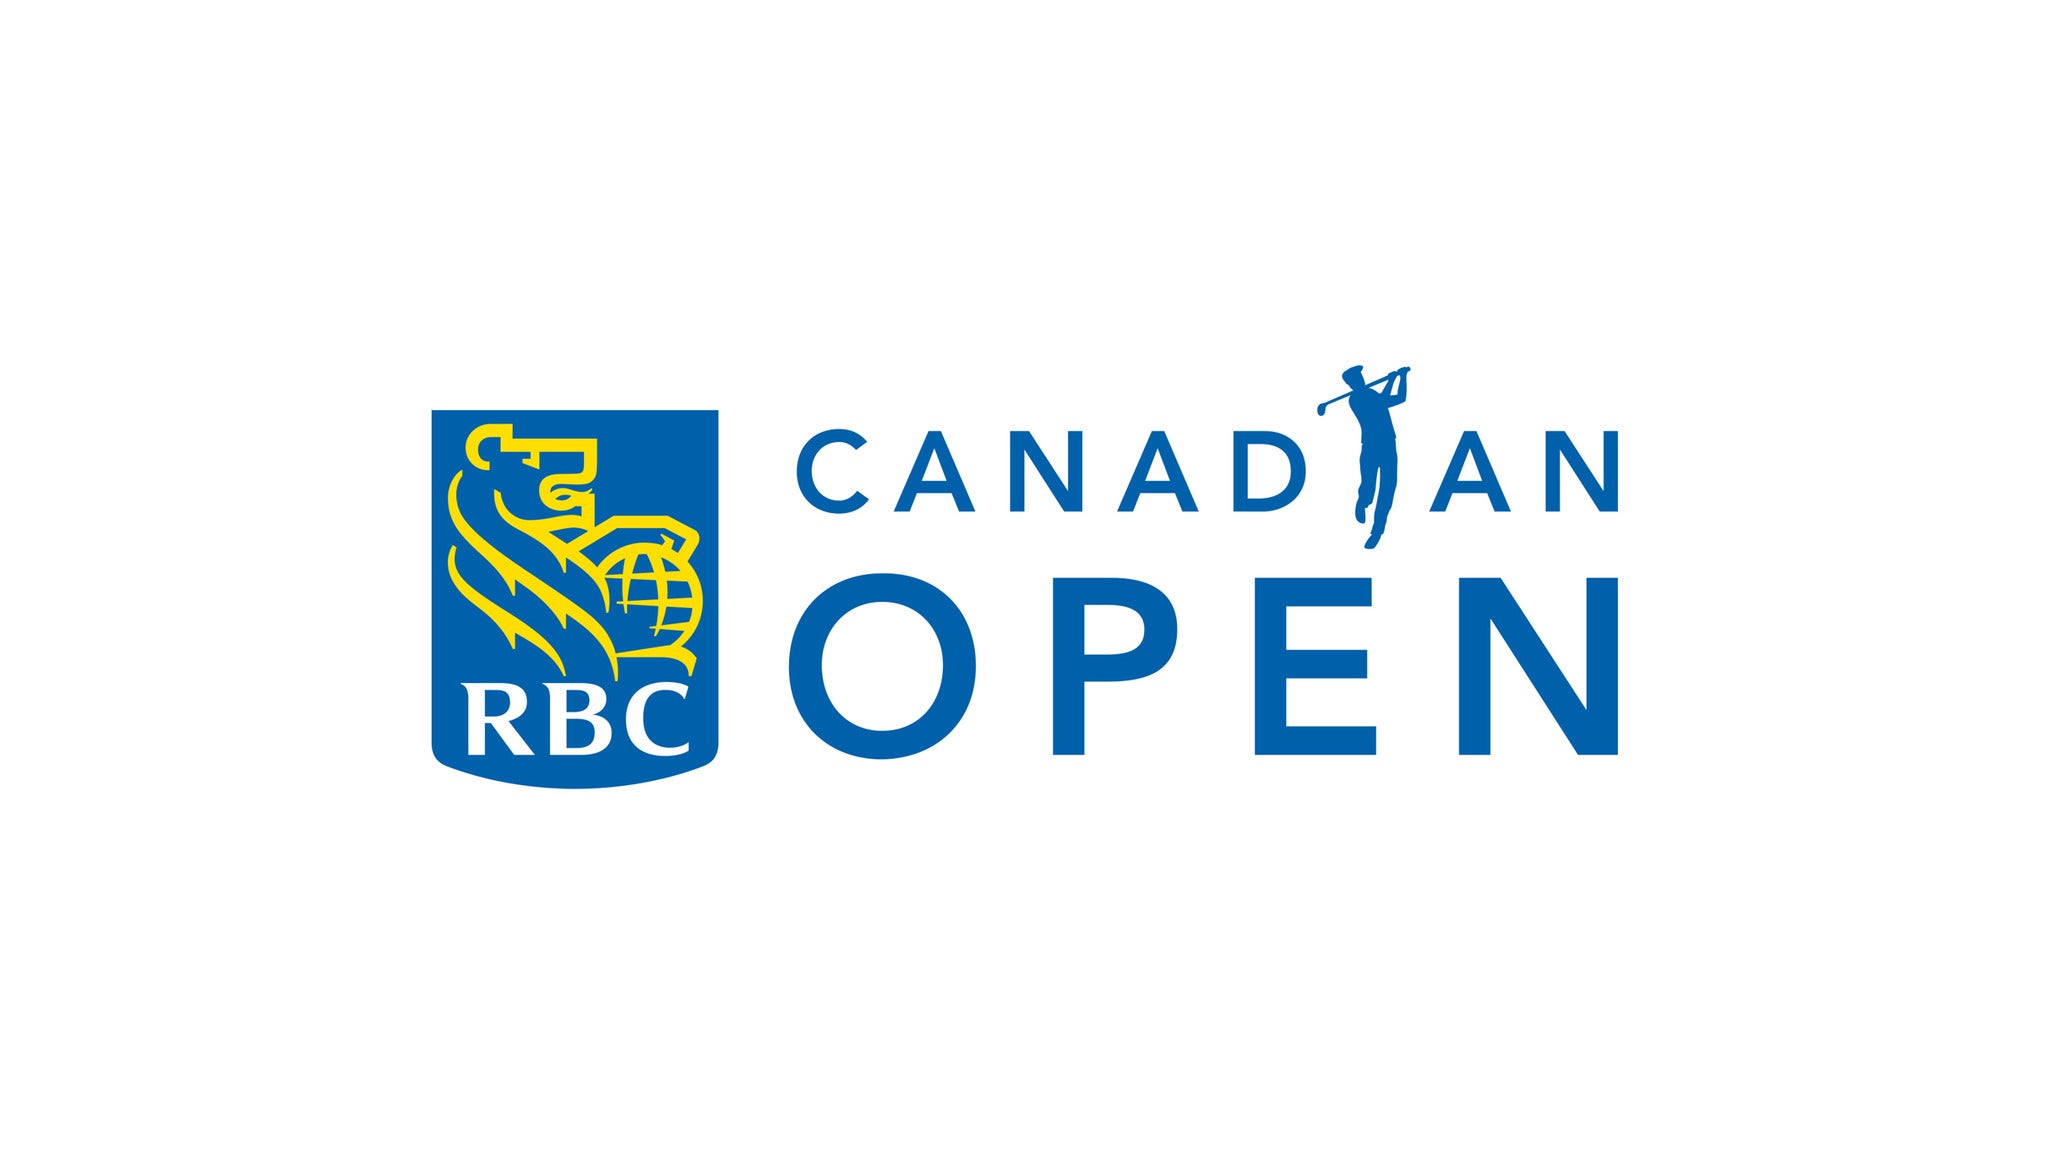 RBC Canadian Open Saturday/RBCxMusic Concert ft. Alanis Morissette in North York promo photo for Day of Event Pricing presale offer code